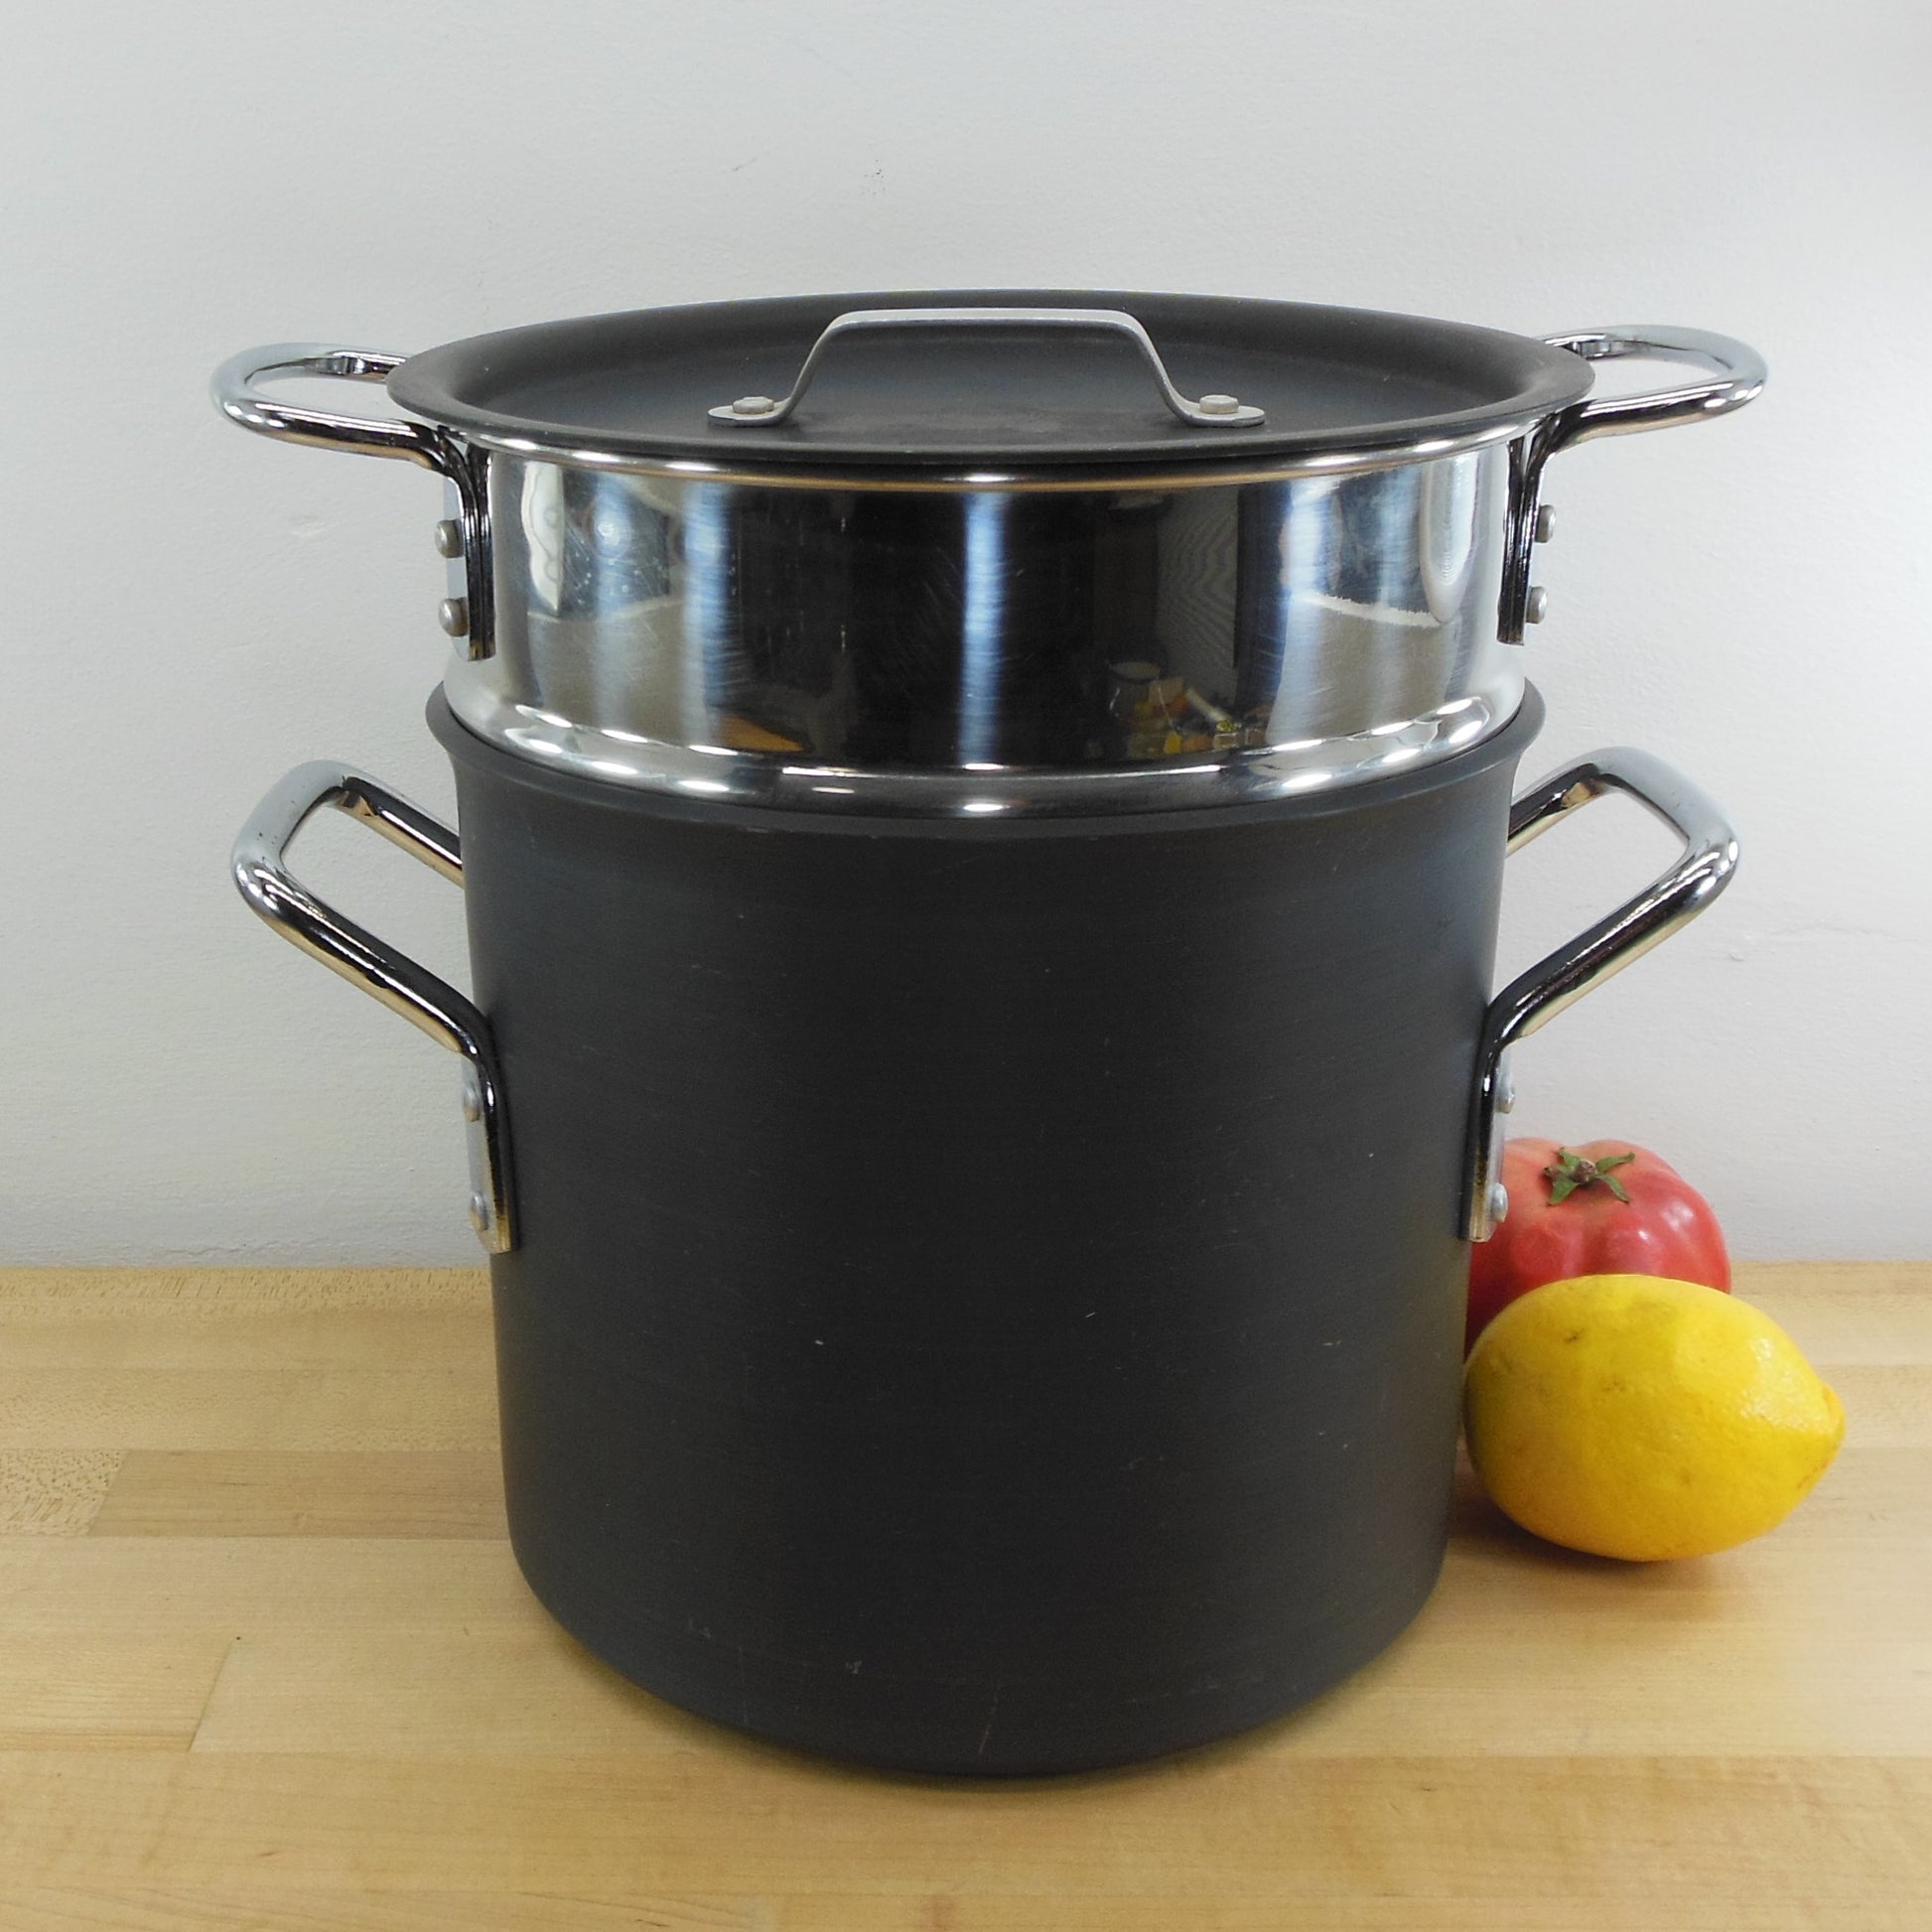 Calphalon USA Anodized 8 Qt Stock Pot Lid with Stainless Pasta Steamer Insert